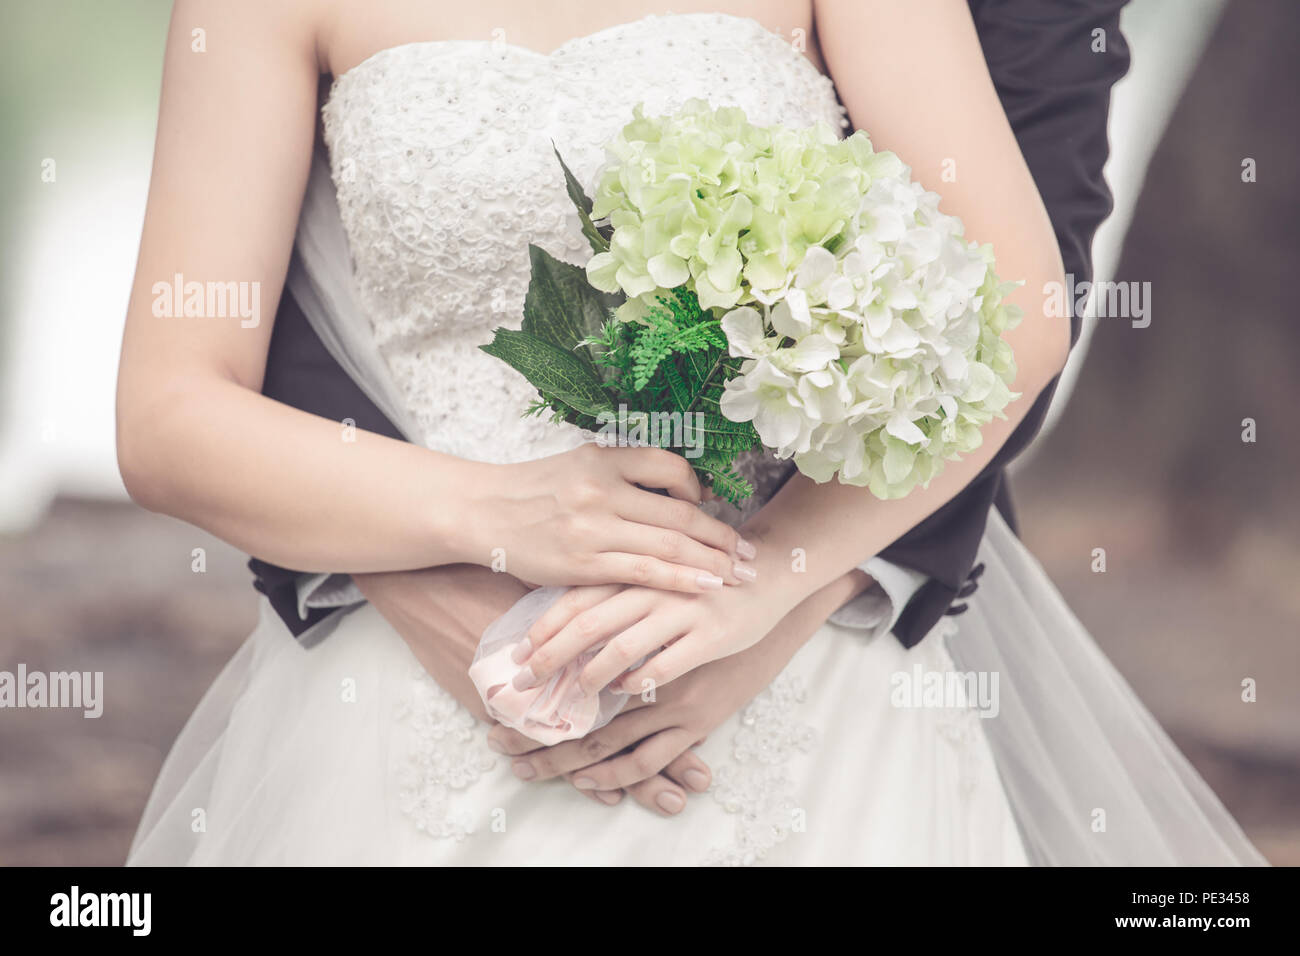 Married bride and groom embracing each other with a bouquet of flowers as a symbol of love and happiness. Stock Photo